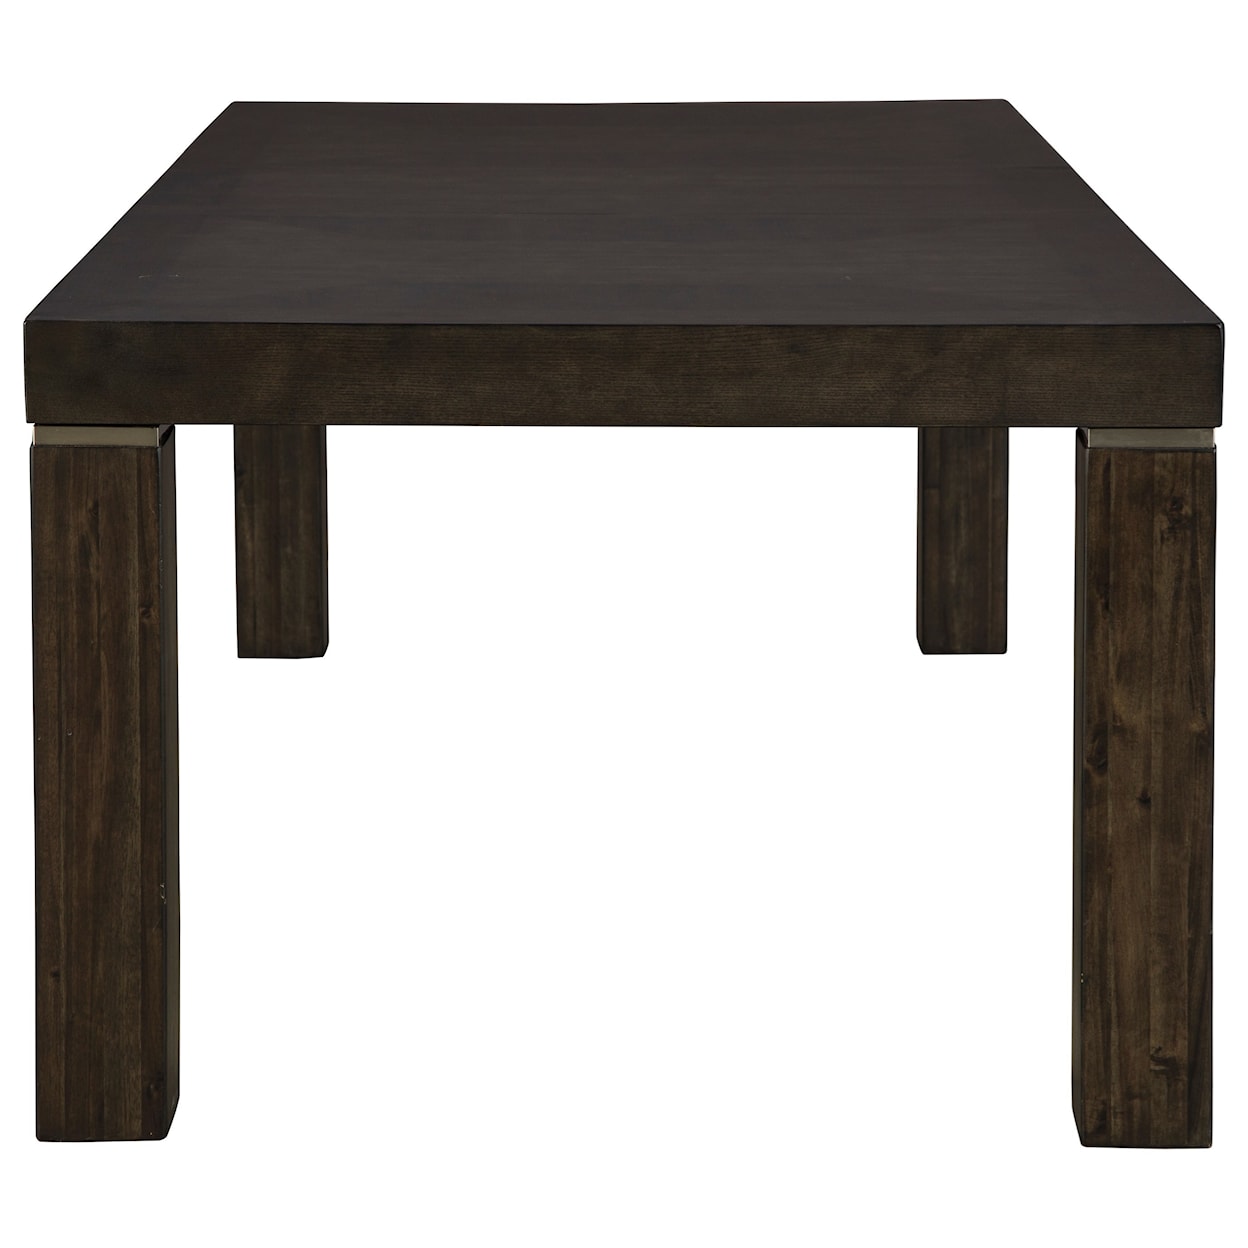 Ashley Furniture Signature Design Hyndell Rectangular Dining Room Extension Table